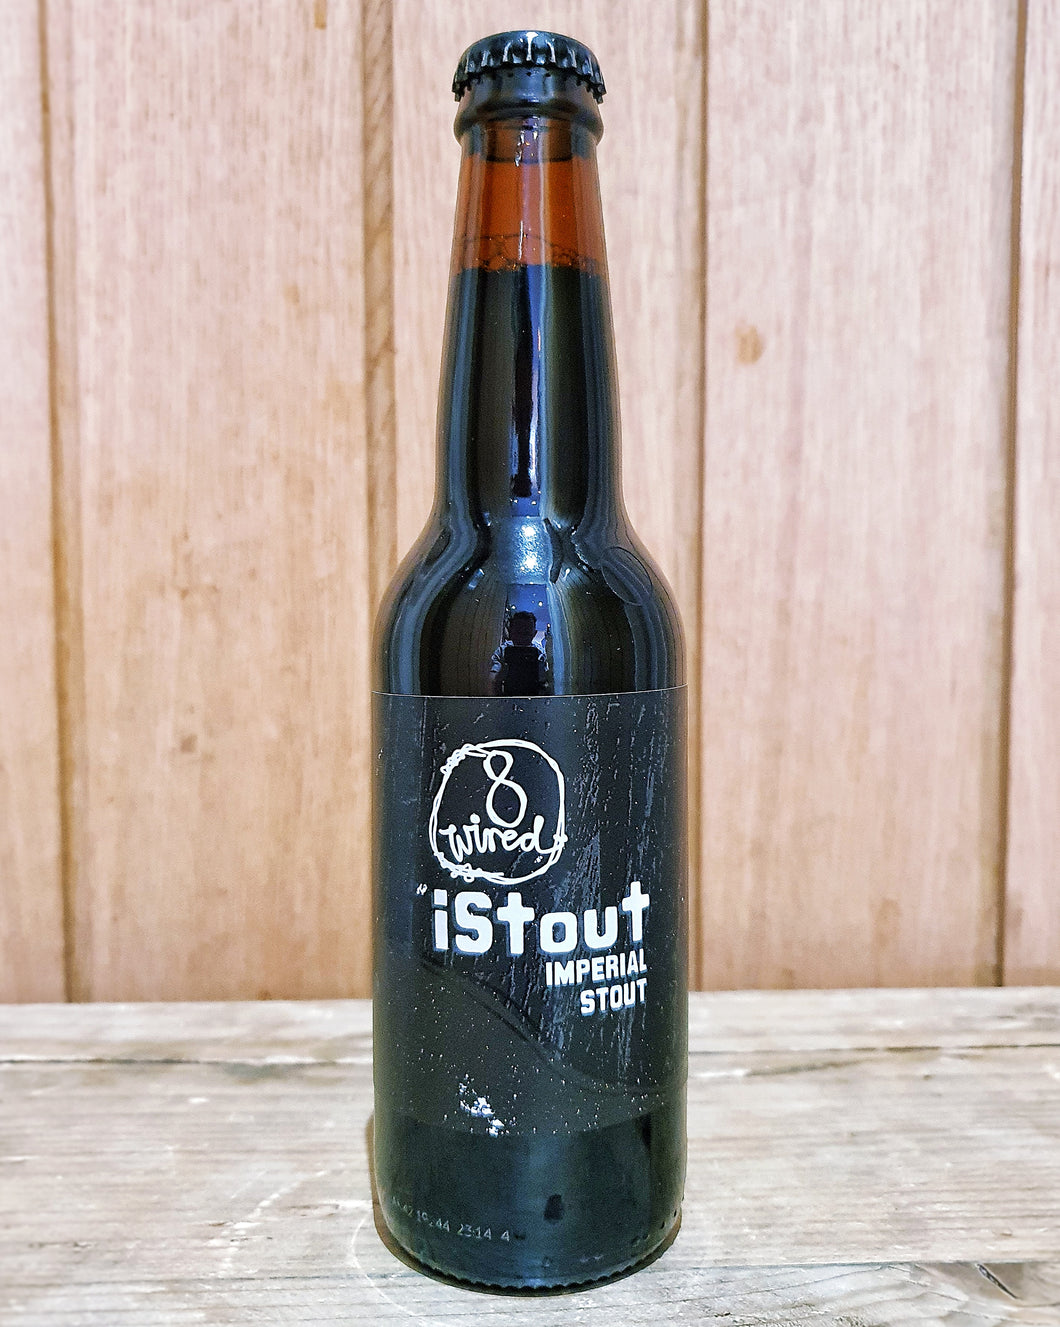 8 Wired Brewing Co - iStout